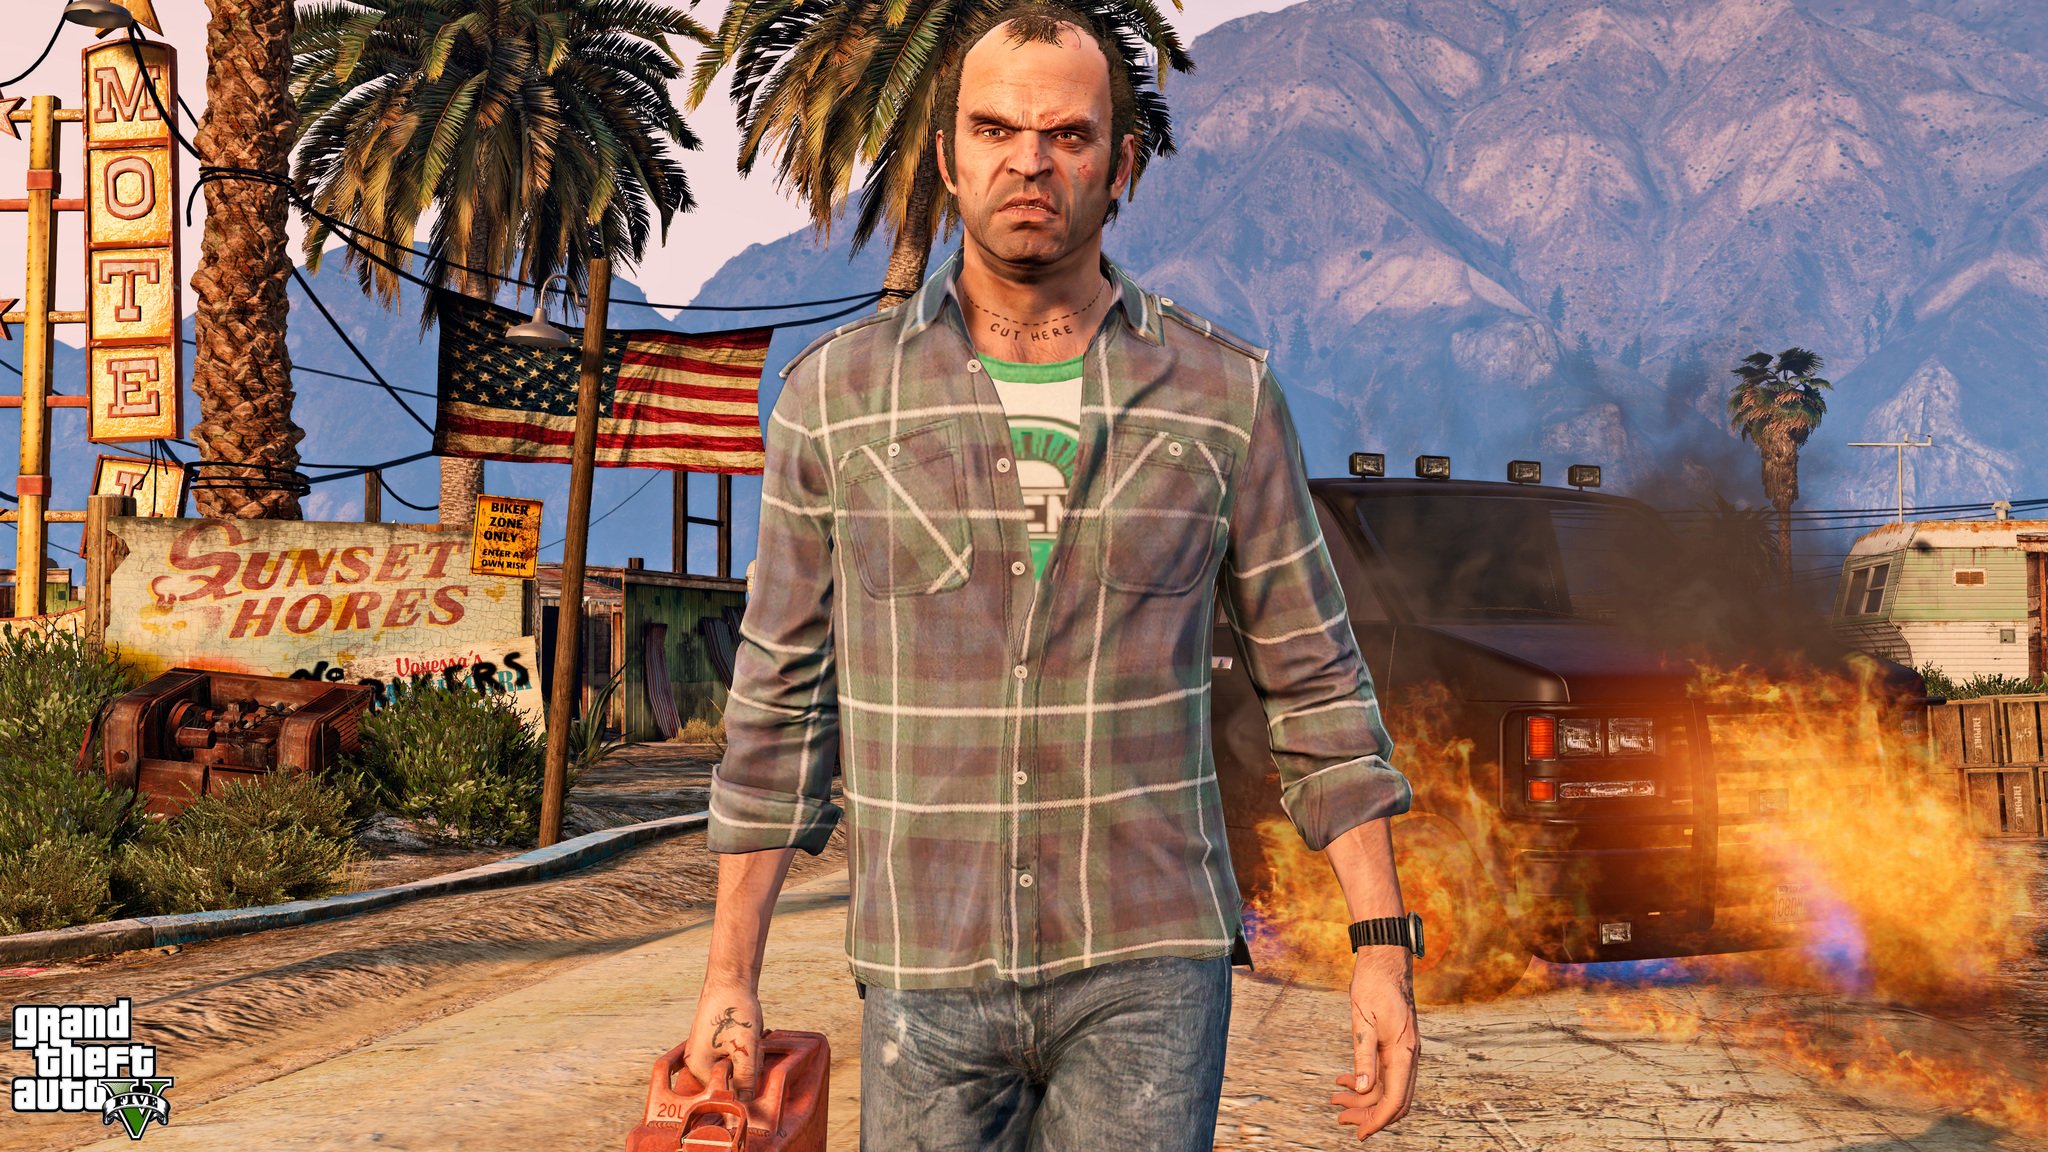 GTA 5 expanded & enhanced remaster offers 4K, ray tracing, 60 fps